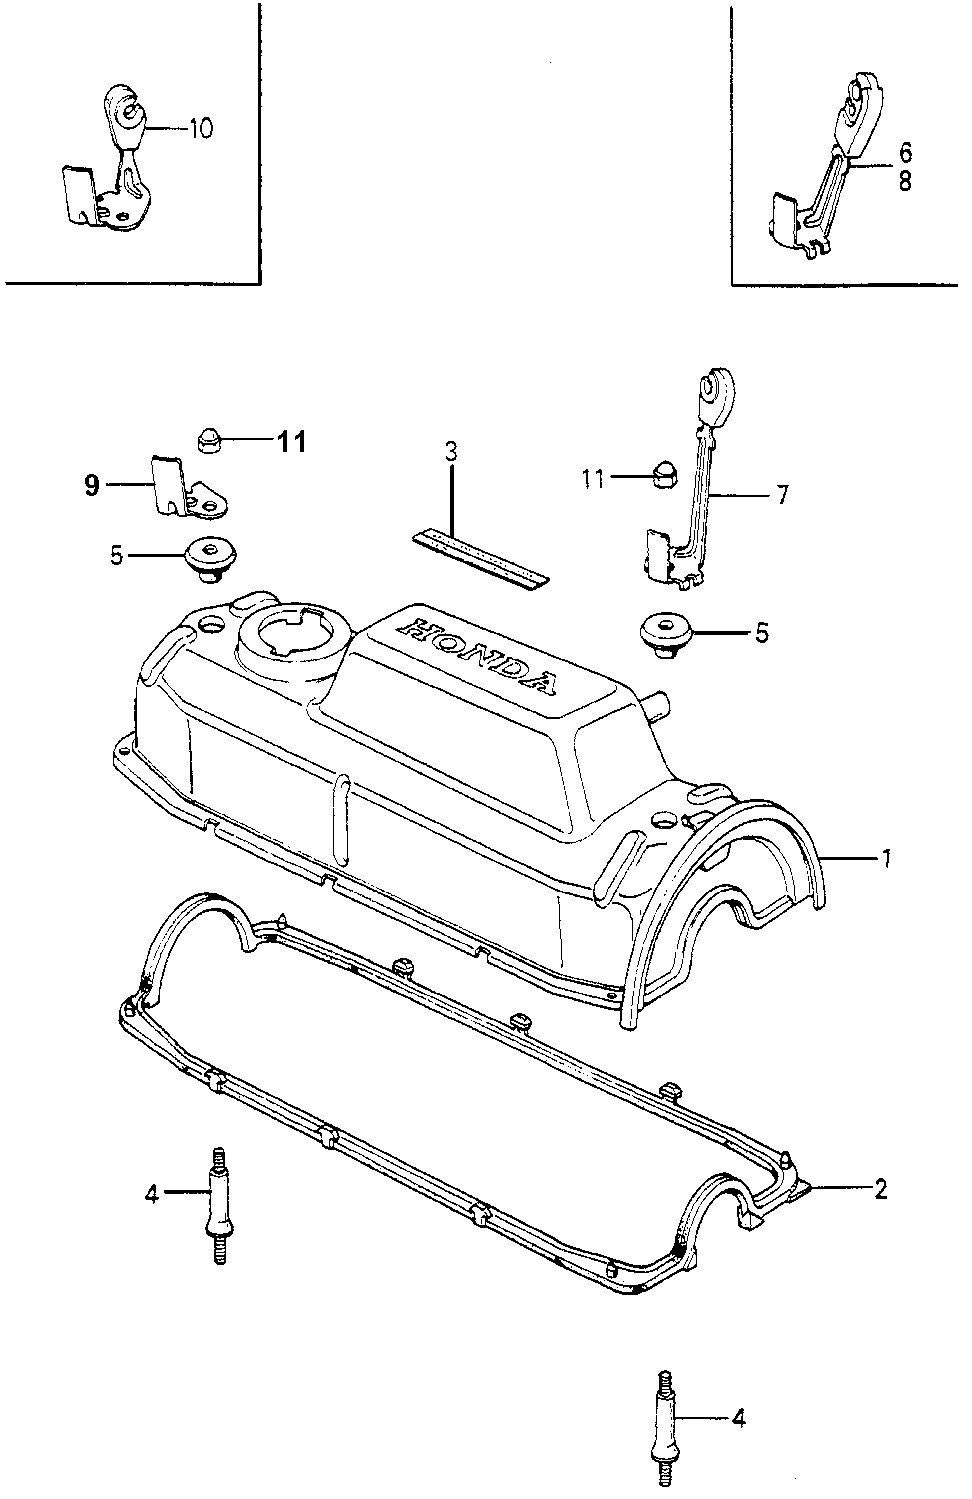 12310-PB2-000 - COVER, CYLINDER HEAD